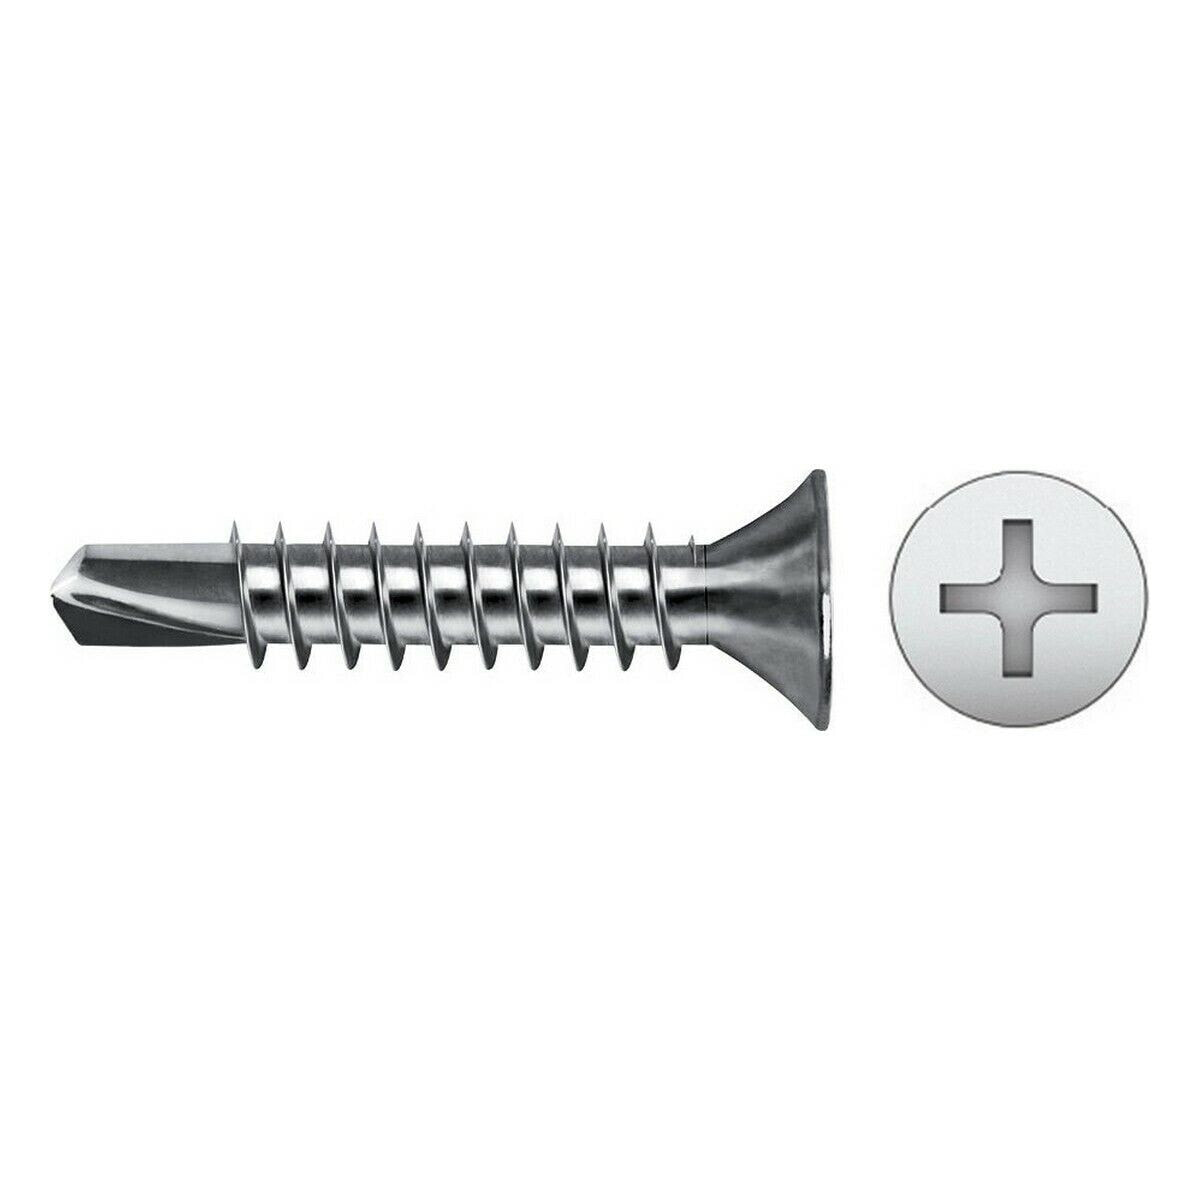 Self-tapping screw CELO 4,8 x 32 mm 250 Units Galvanised countersunk